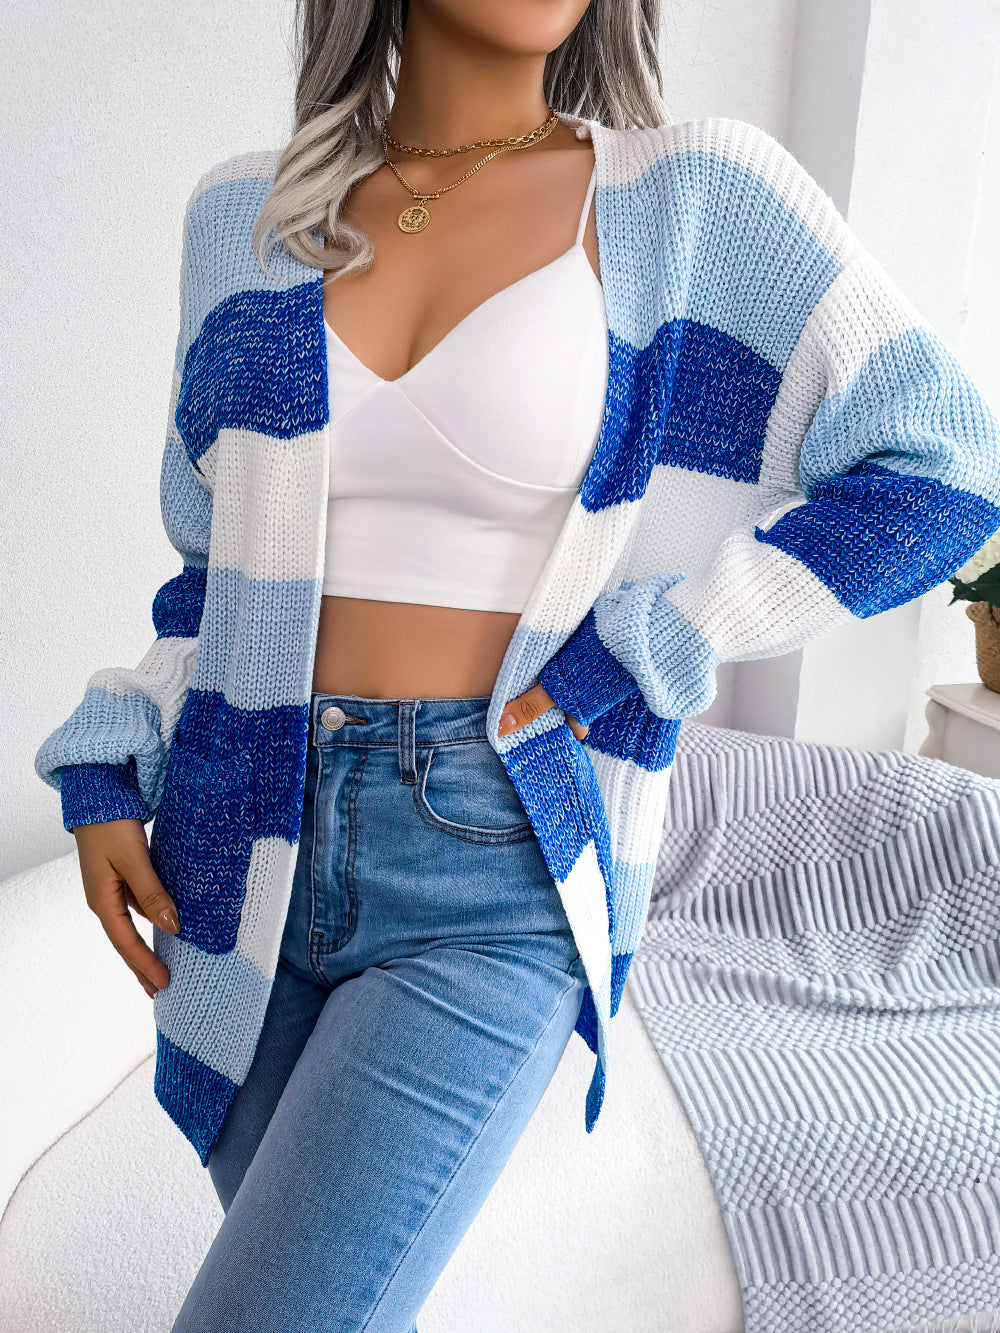 Women's Striped Knitted Cardigan